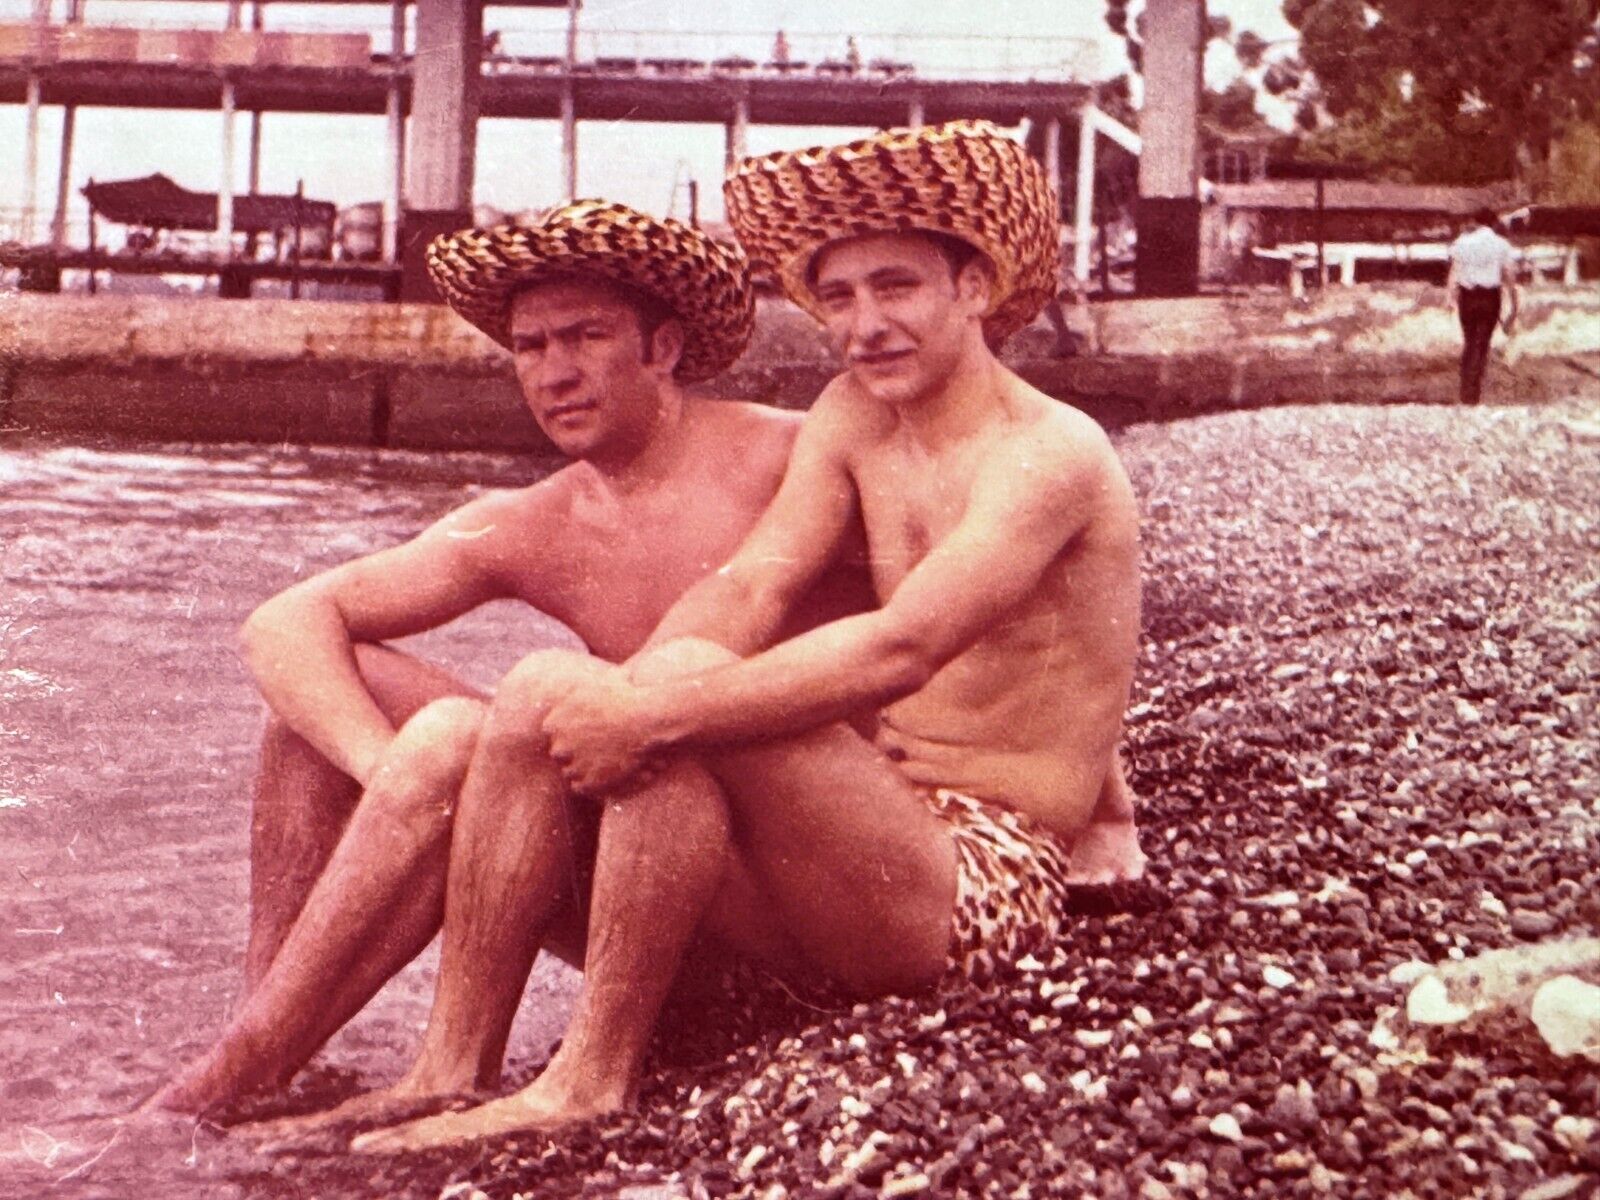 1975 Affectionate Men Trunks Bulge Two Guys in Hats Beach Gay int Vint Photo